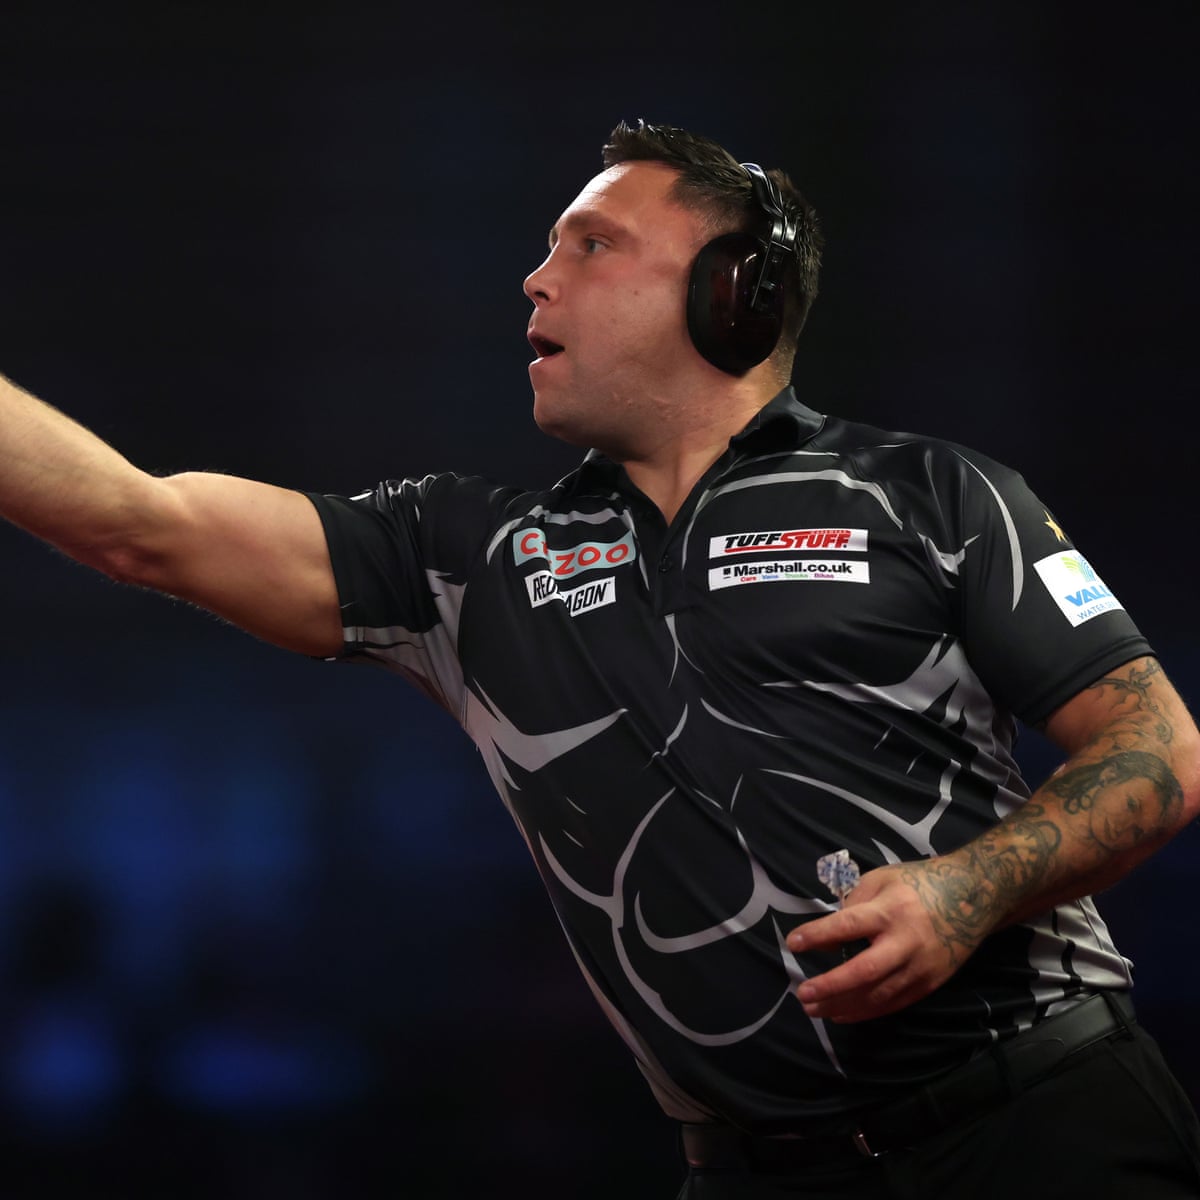 Låse rig interval PDC world darts: Gerwyn Price exits in ear defenders and may not return |  PDC World Championships | The Guardian